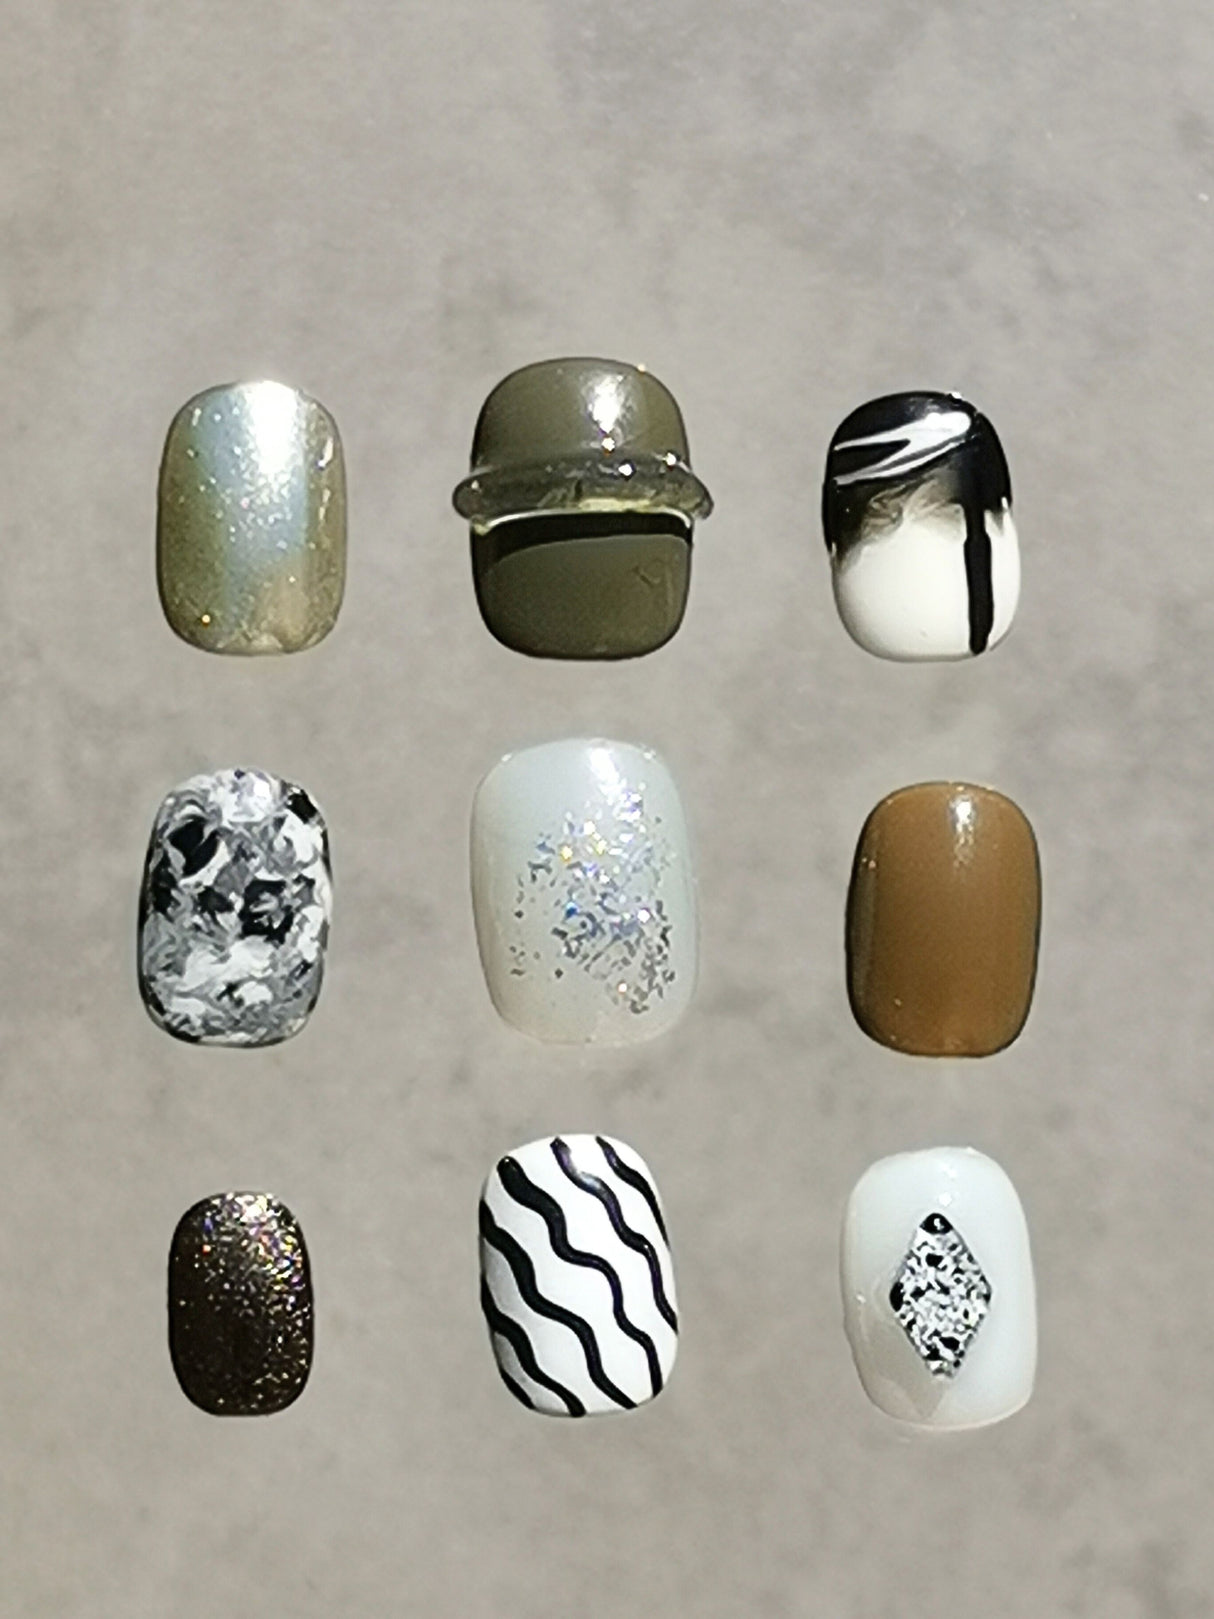 These press-on nails offer a variety of design options for personal style expression, from simple to bold, for special occasions or everyday wear.